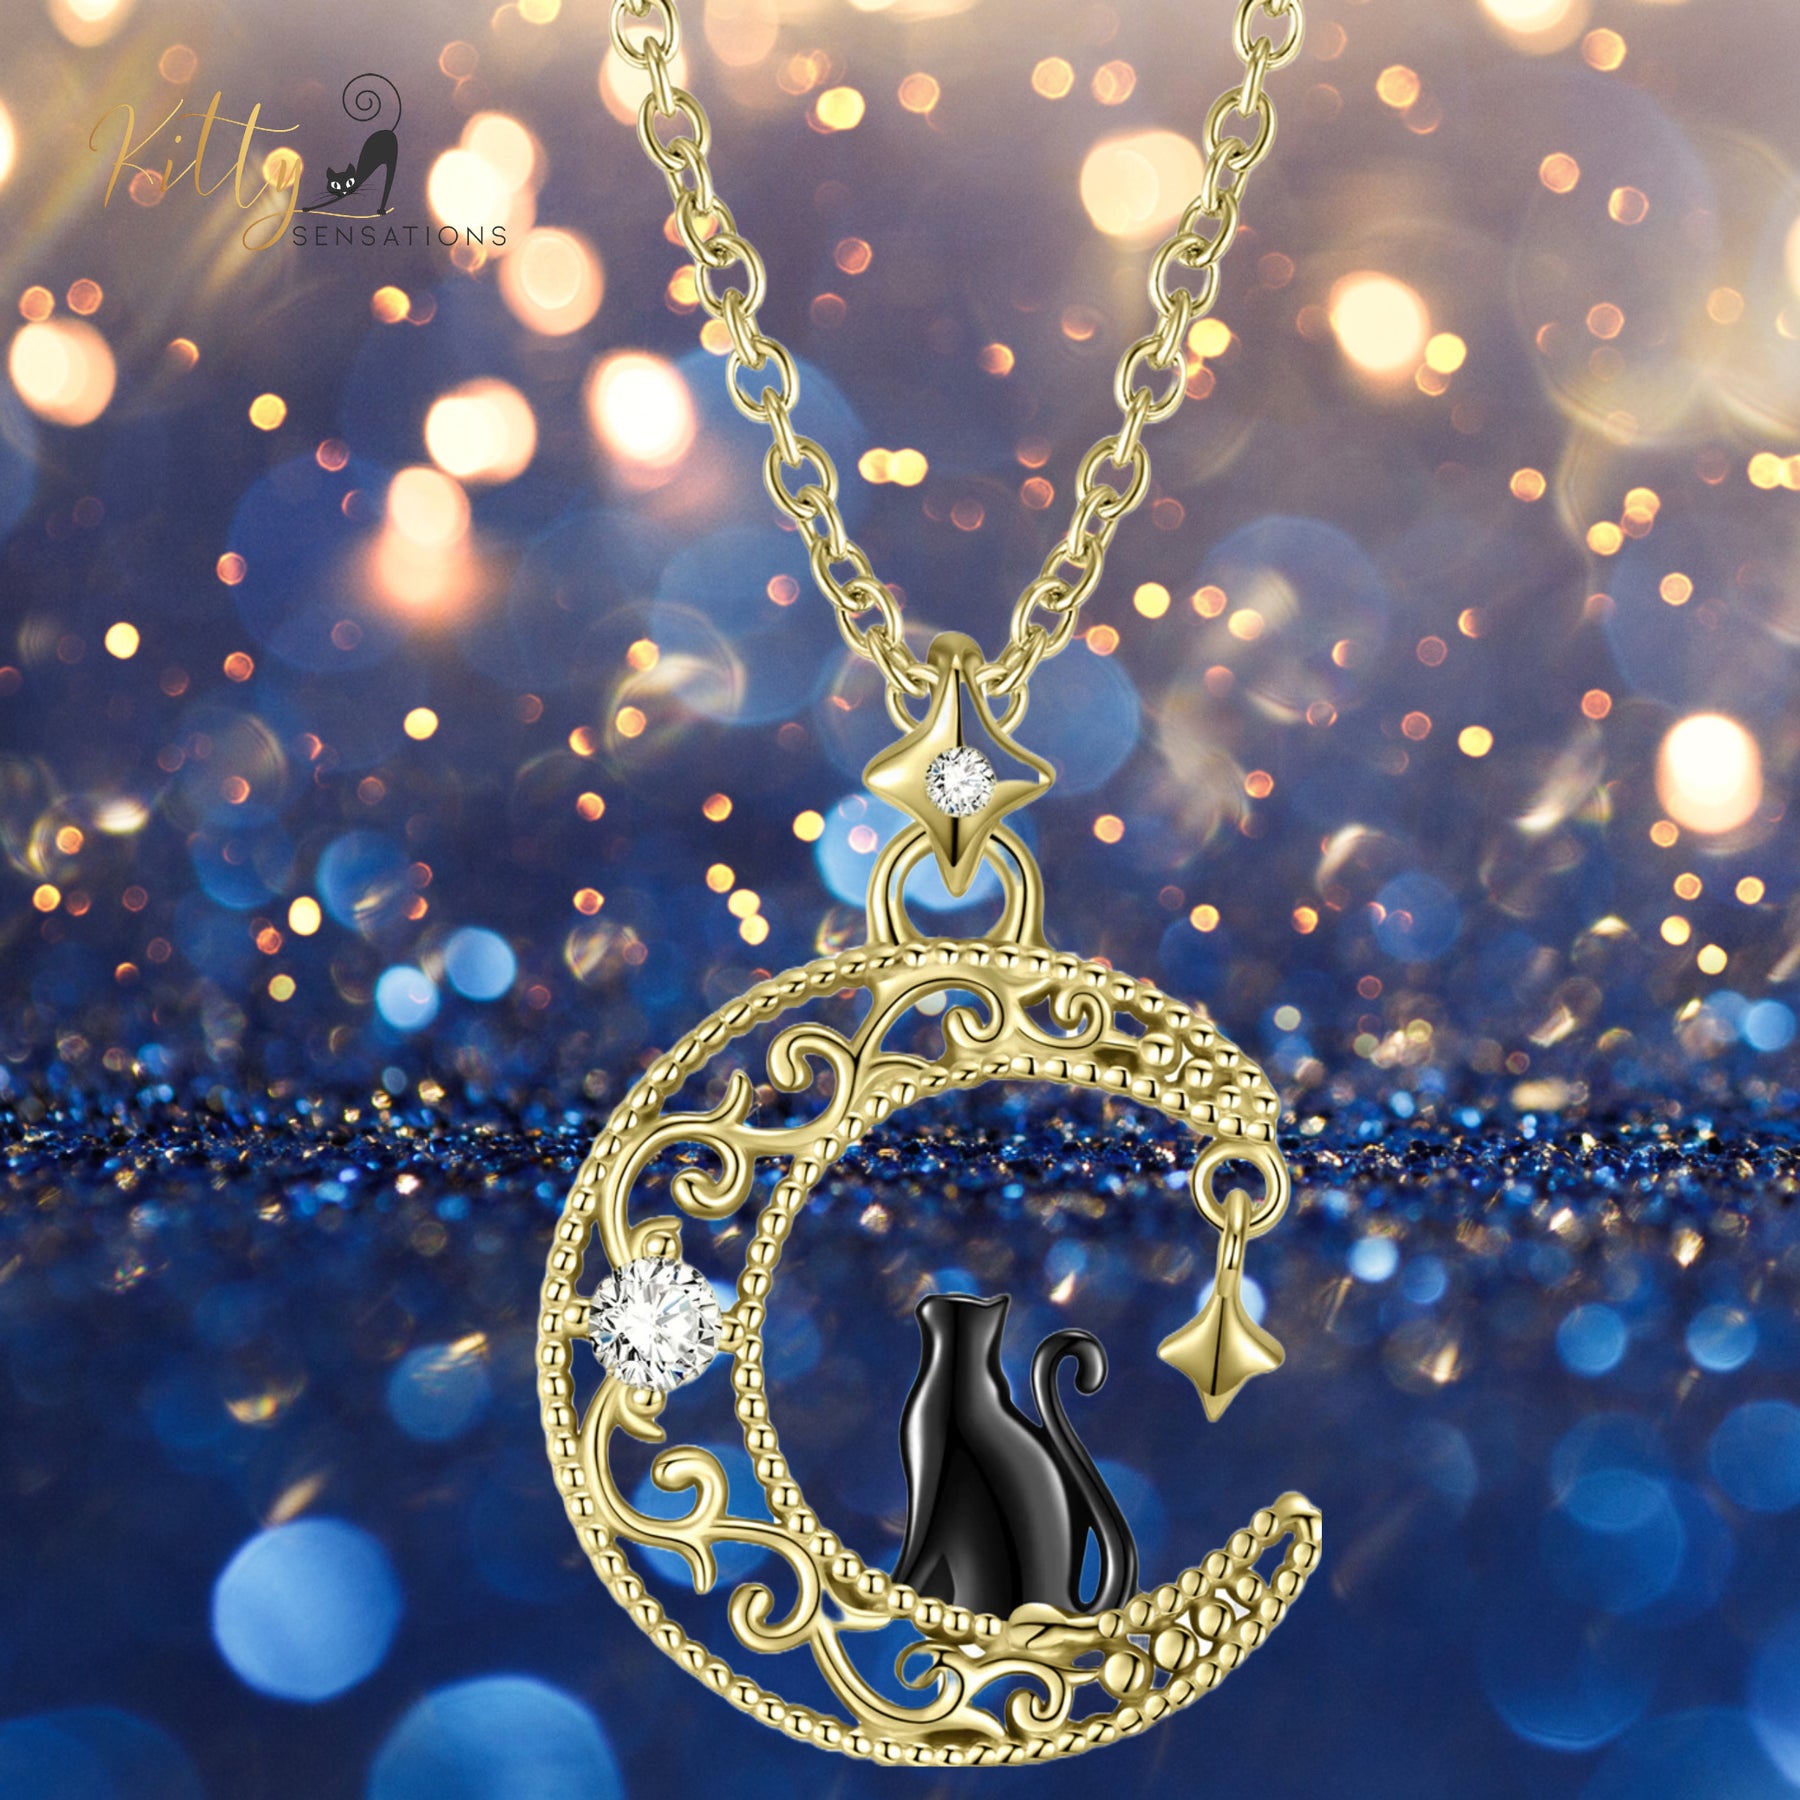 www.KittySensations.com: Black & Gold Moon Kitty Necklace in Solid 925 Sterling Silver ($89.15): https://www.kittysensations.com/products/black-gold-moon-kitty-necklace-in-solid-925-sterling-silver